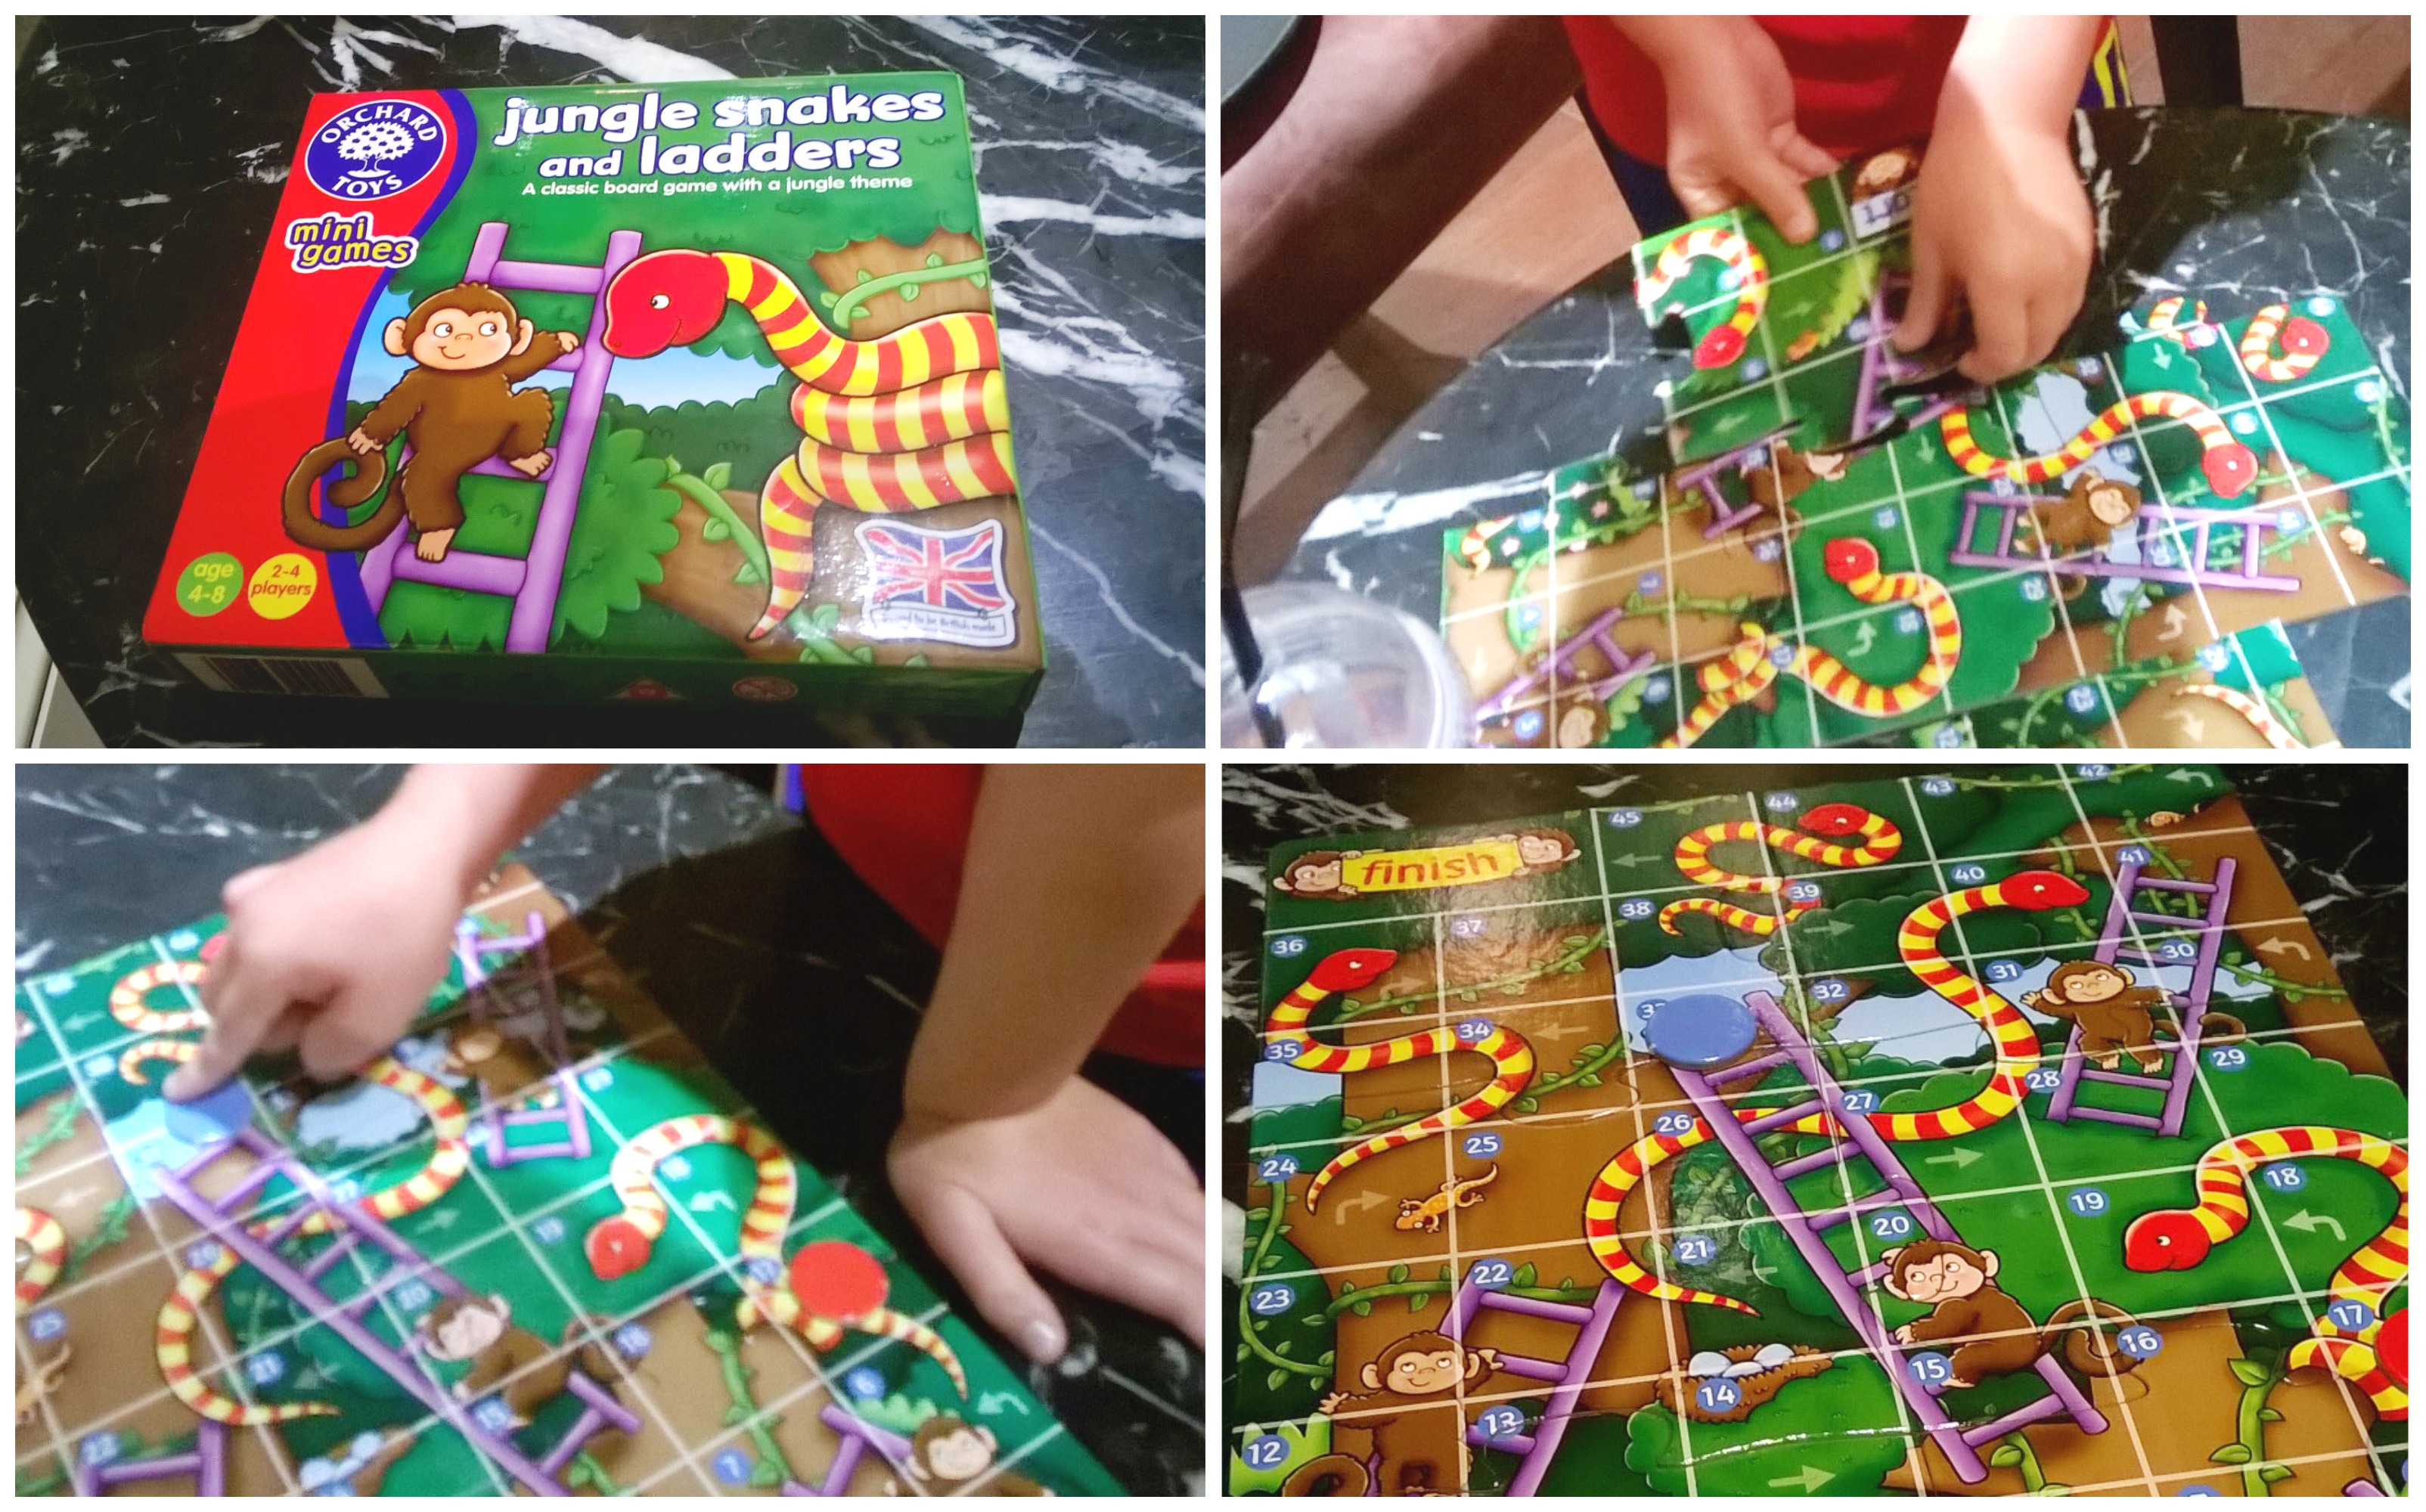 Orchard Mini Game Jungle Snakes and Ladders 352 